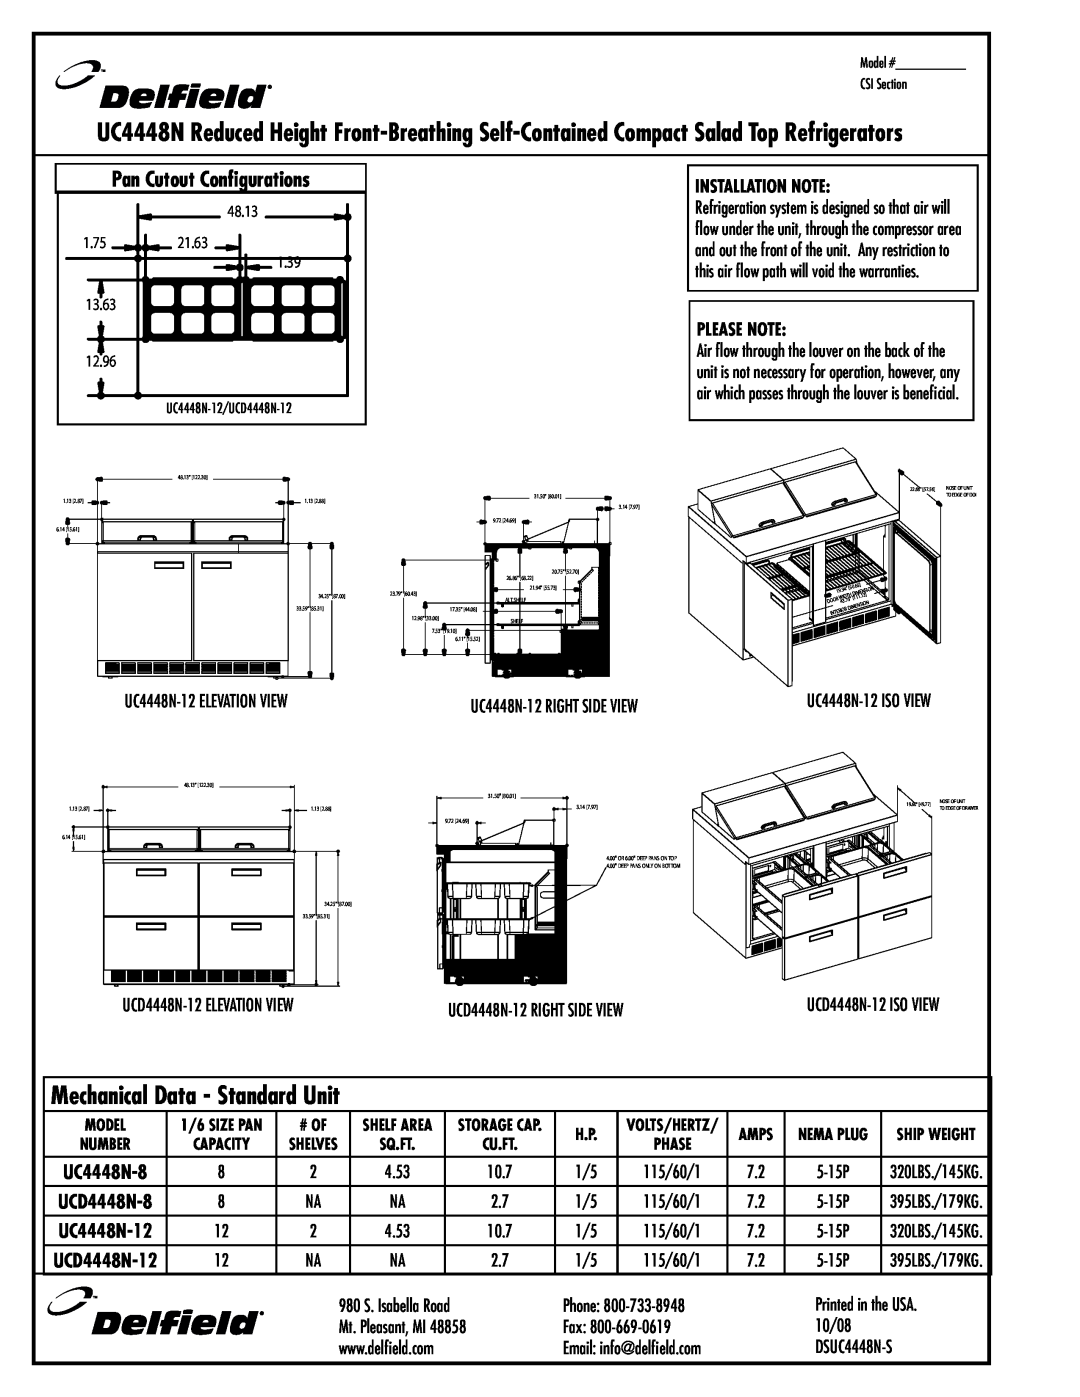 Delfield UC4448N-12, UC4448N-8 Mechanical Data - Standard Unit, Pan Cutout Configurations, Installation Note, Please Note 